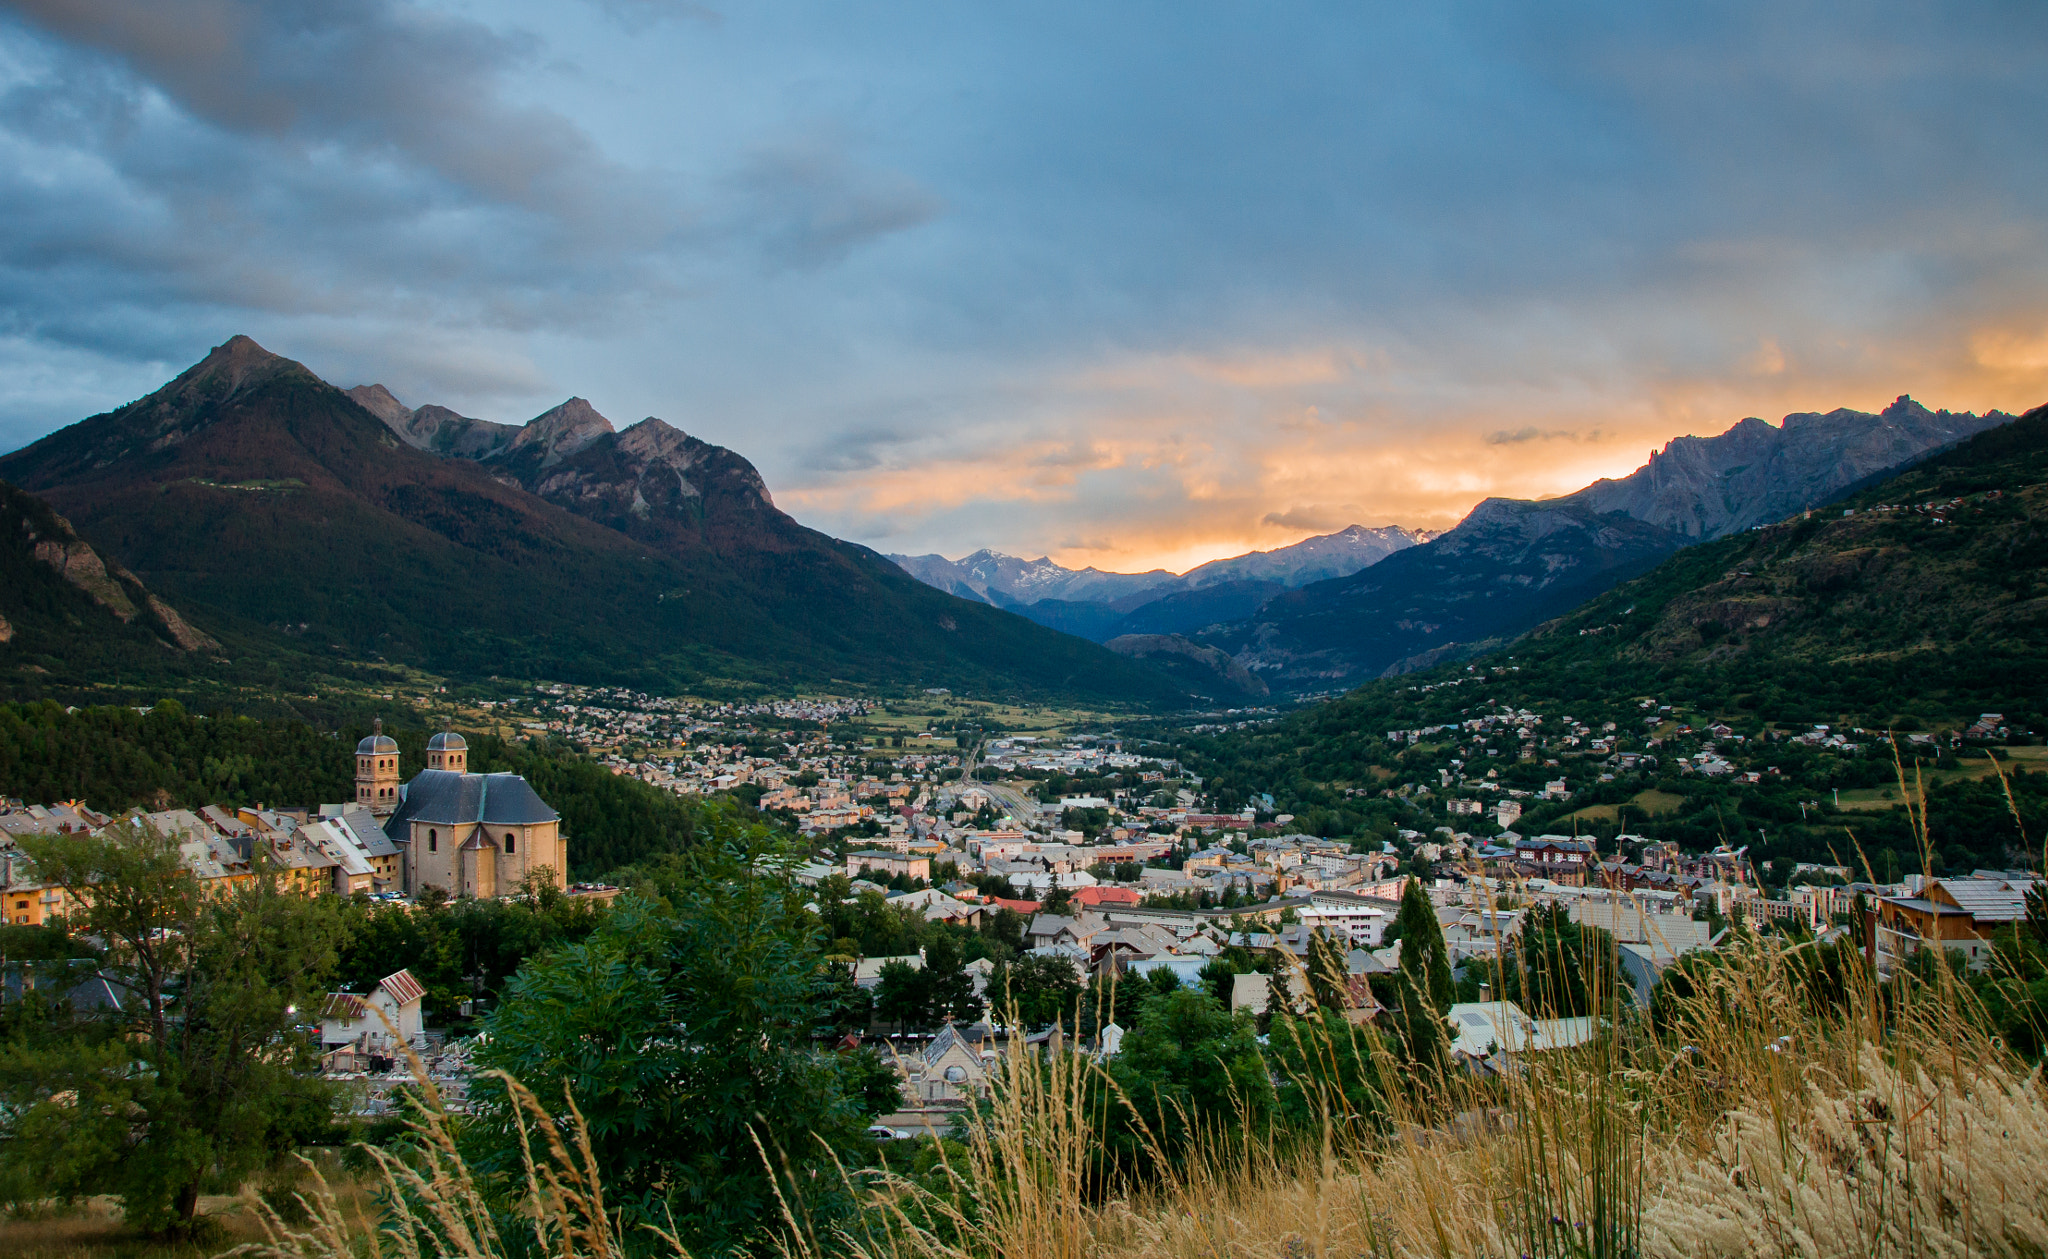 Sony Alpha DSLR-A450 + Tamron SP AF 17-50mm F2.8 XR Di II LD Aspherical (IF) sample photo. Briancon city photography